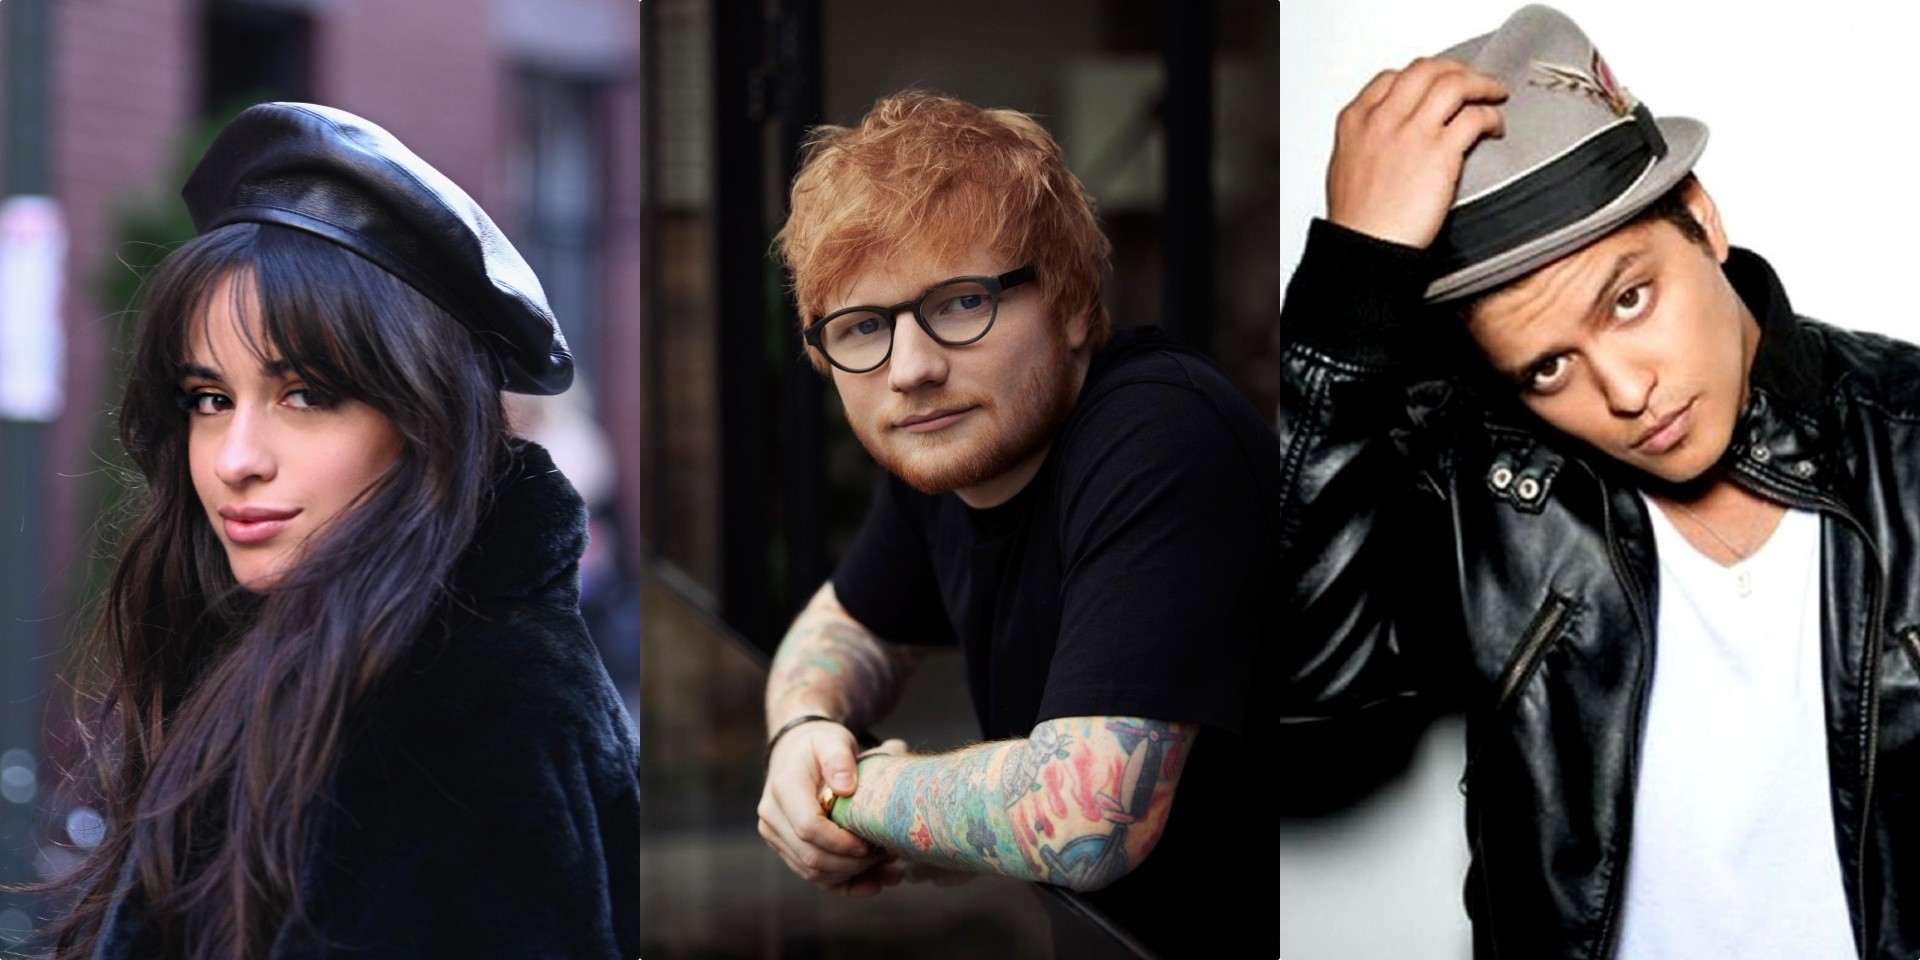 The Ed Sheeran No. 6 Collaborations Project pop-up store is coming to Singapore